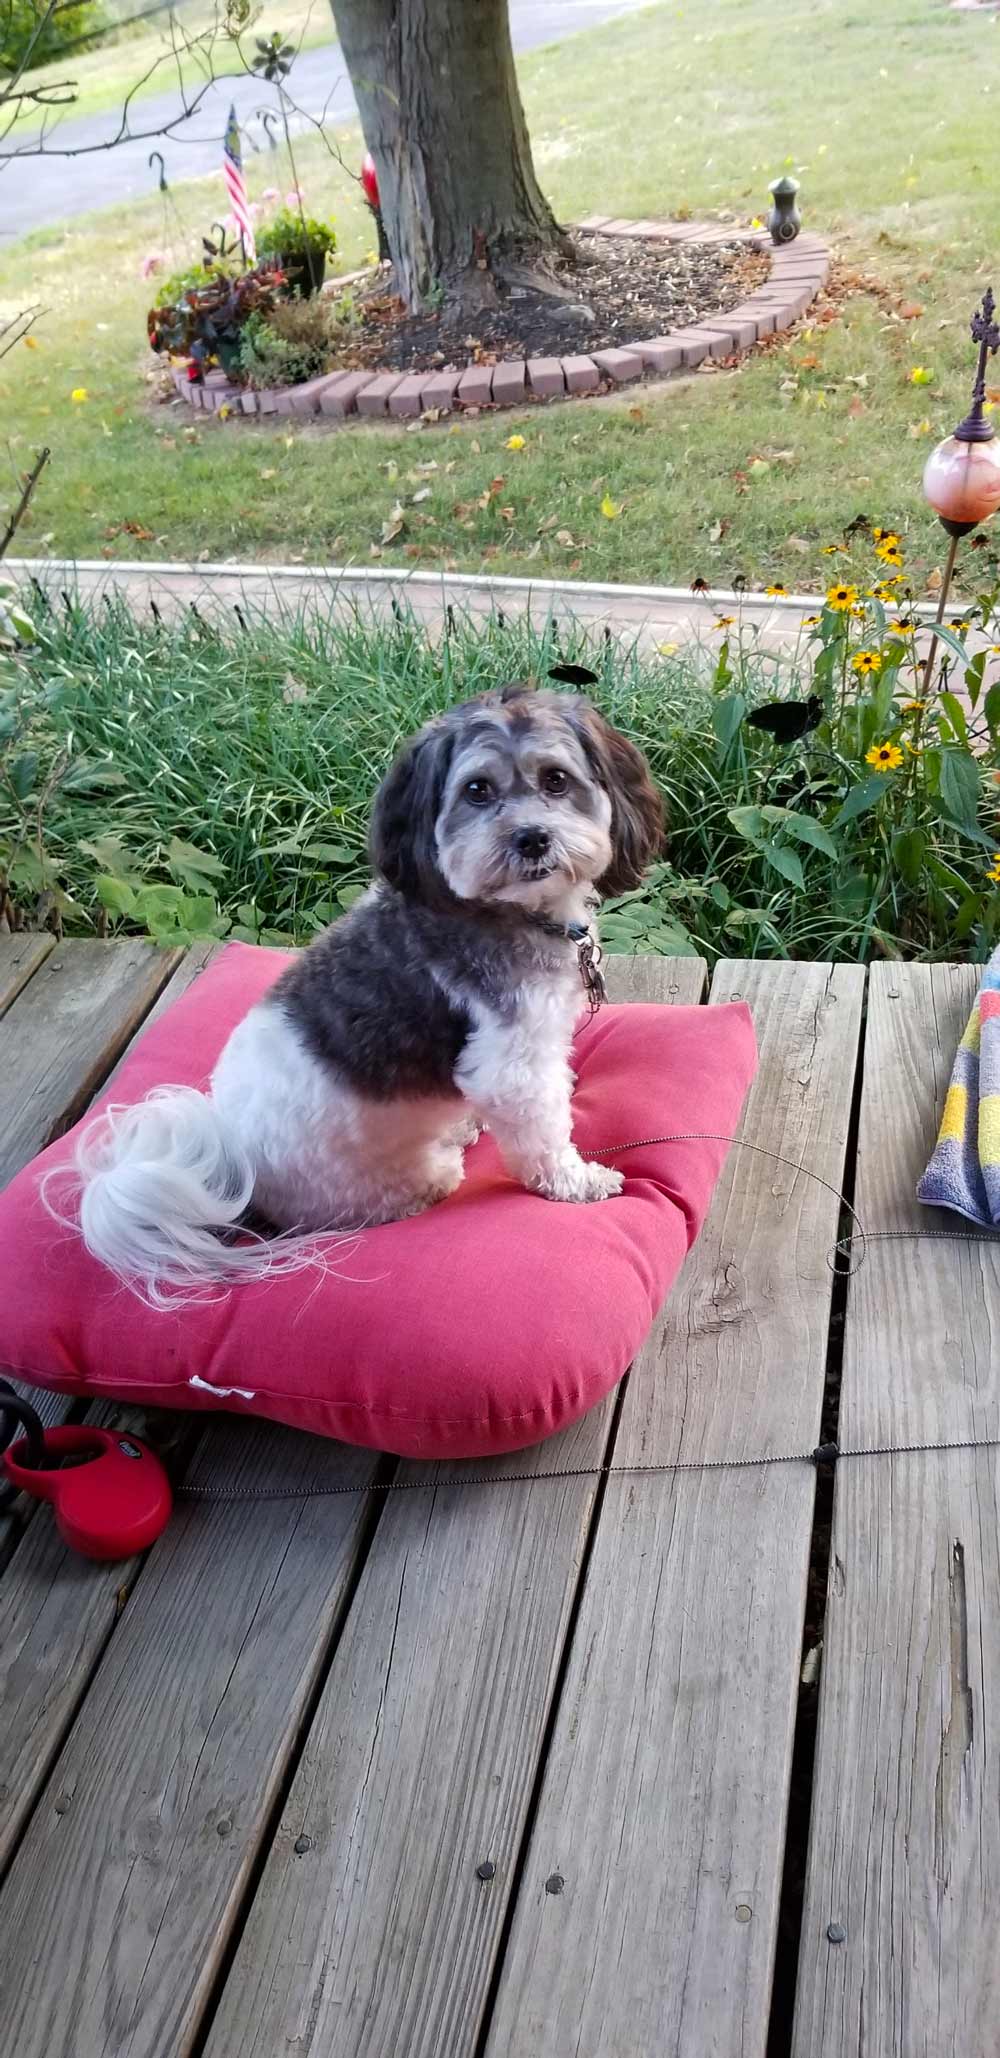 Meet Cooper. He’s a King Charles and Shih Tzu blend, and Mom says he’s a true joy: he really does think he’s King! He looks happy sitting on his pillow outside on a crisp fall day.